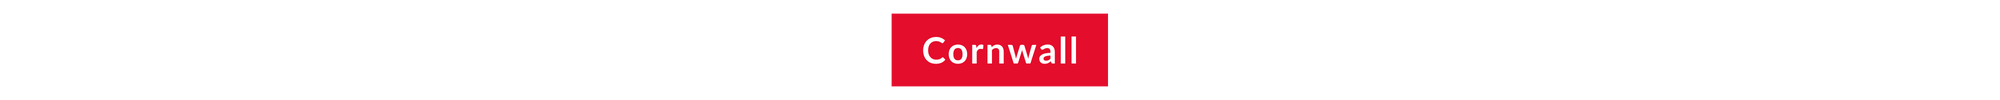 The word Cornwall in a red block